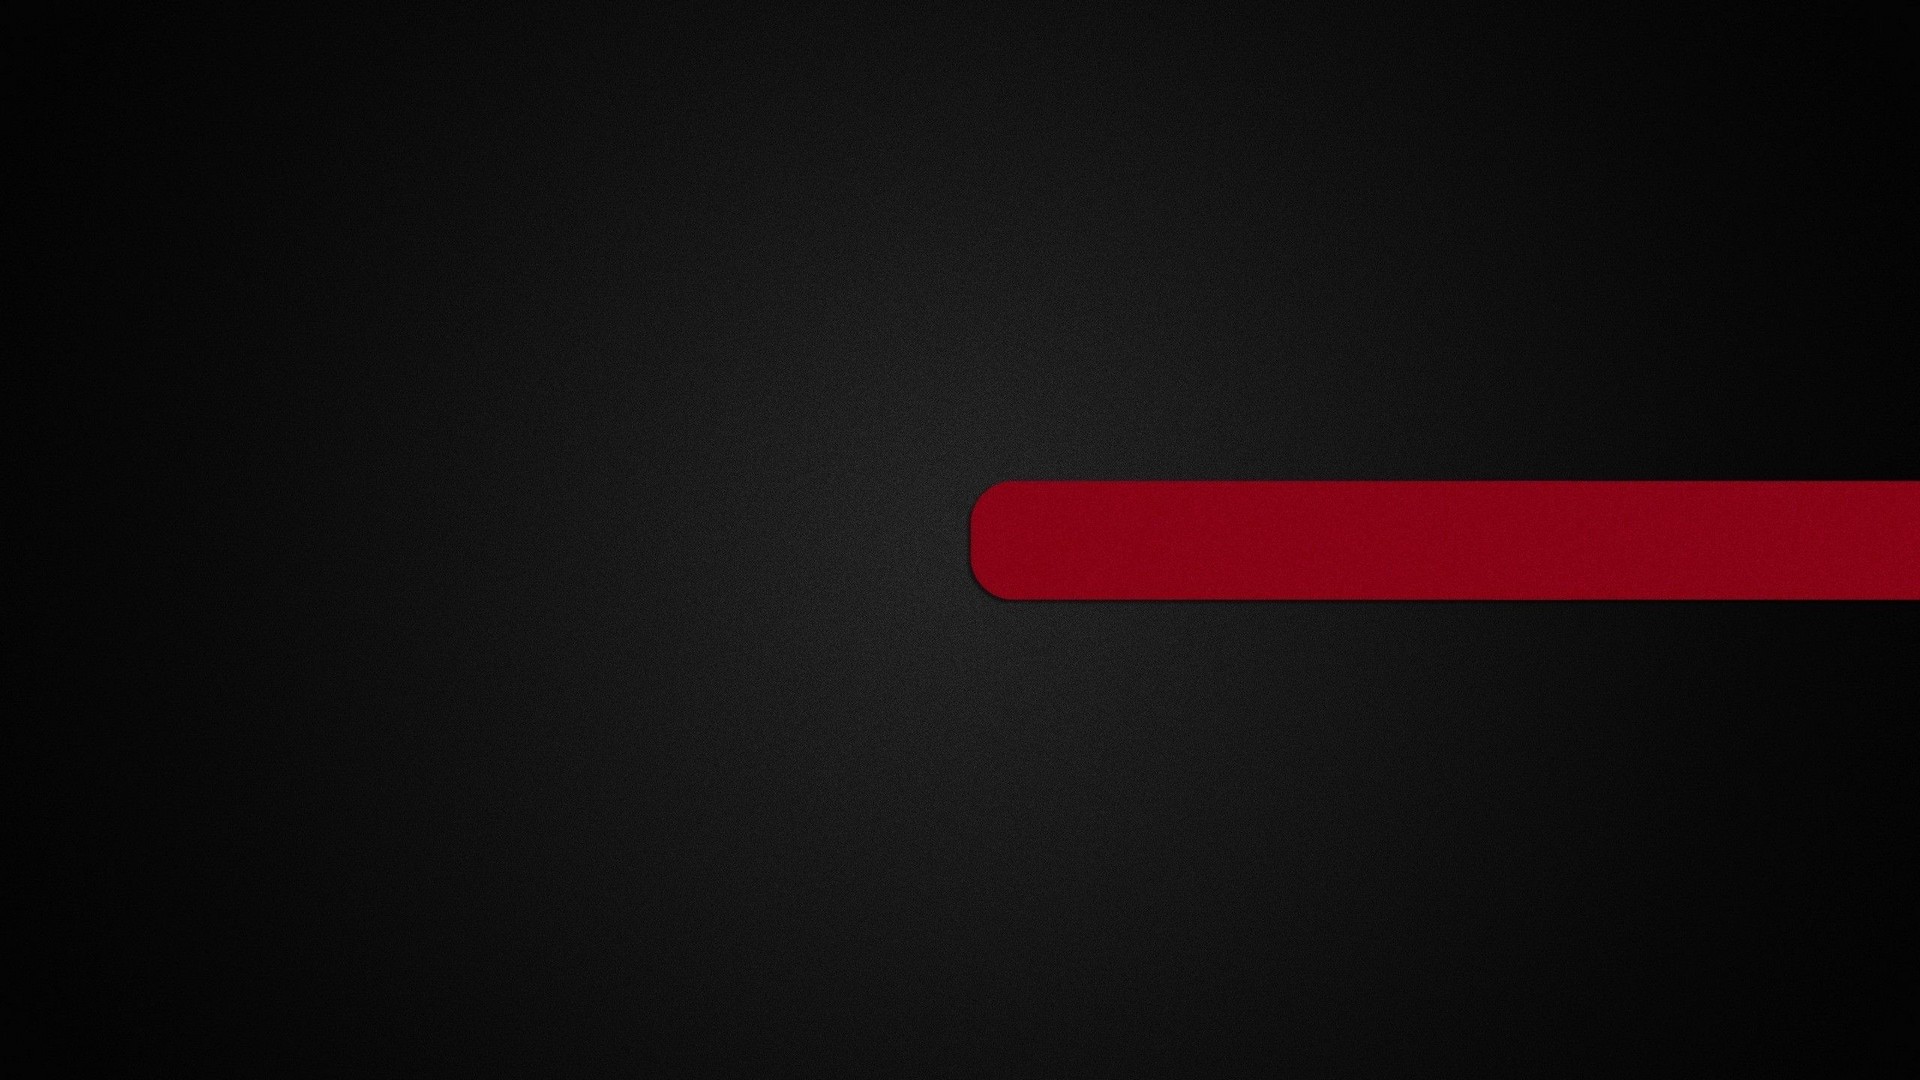 HD Wallpaper Black and Red with high-resolution 1920x1080 pixel. You can use this wallpaper for your Desktop Computer Backgrounds, Mac Wallpapers, Android Lock screen or iPhone Screensavers and another smartphone device